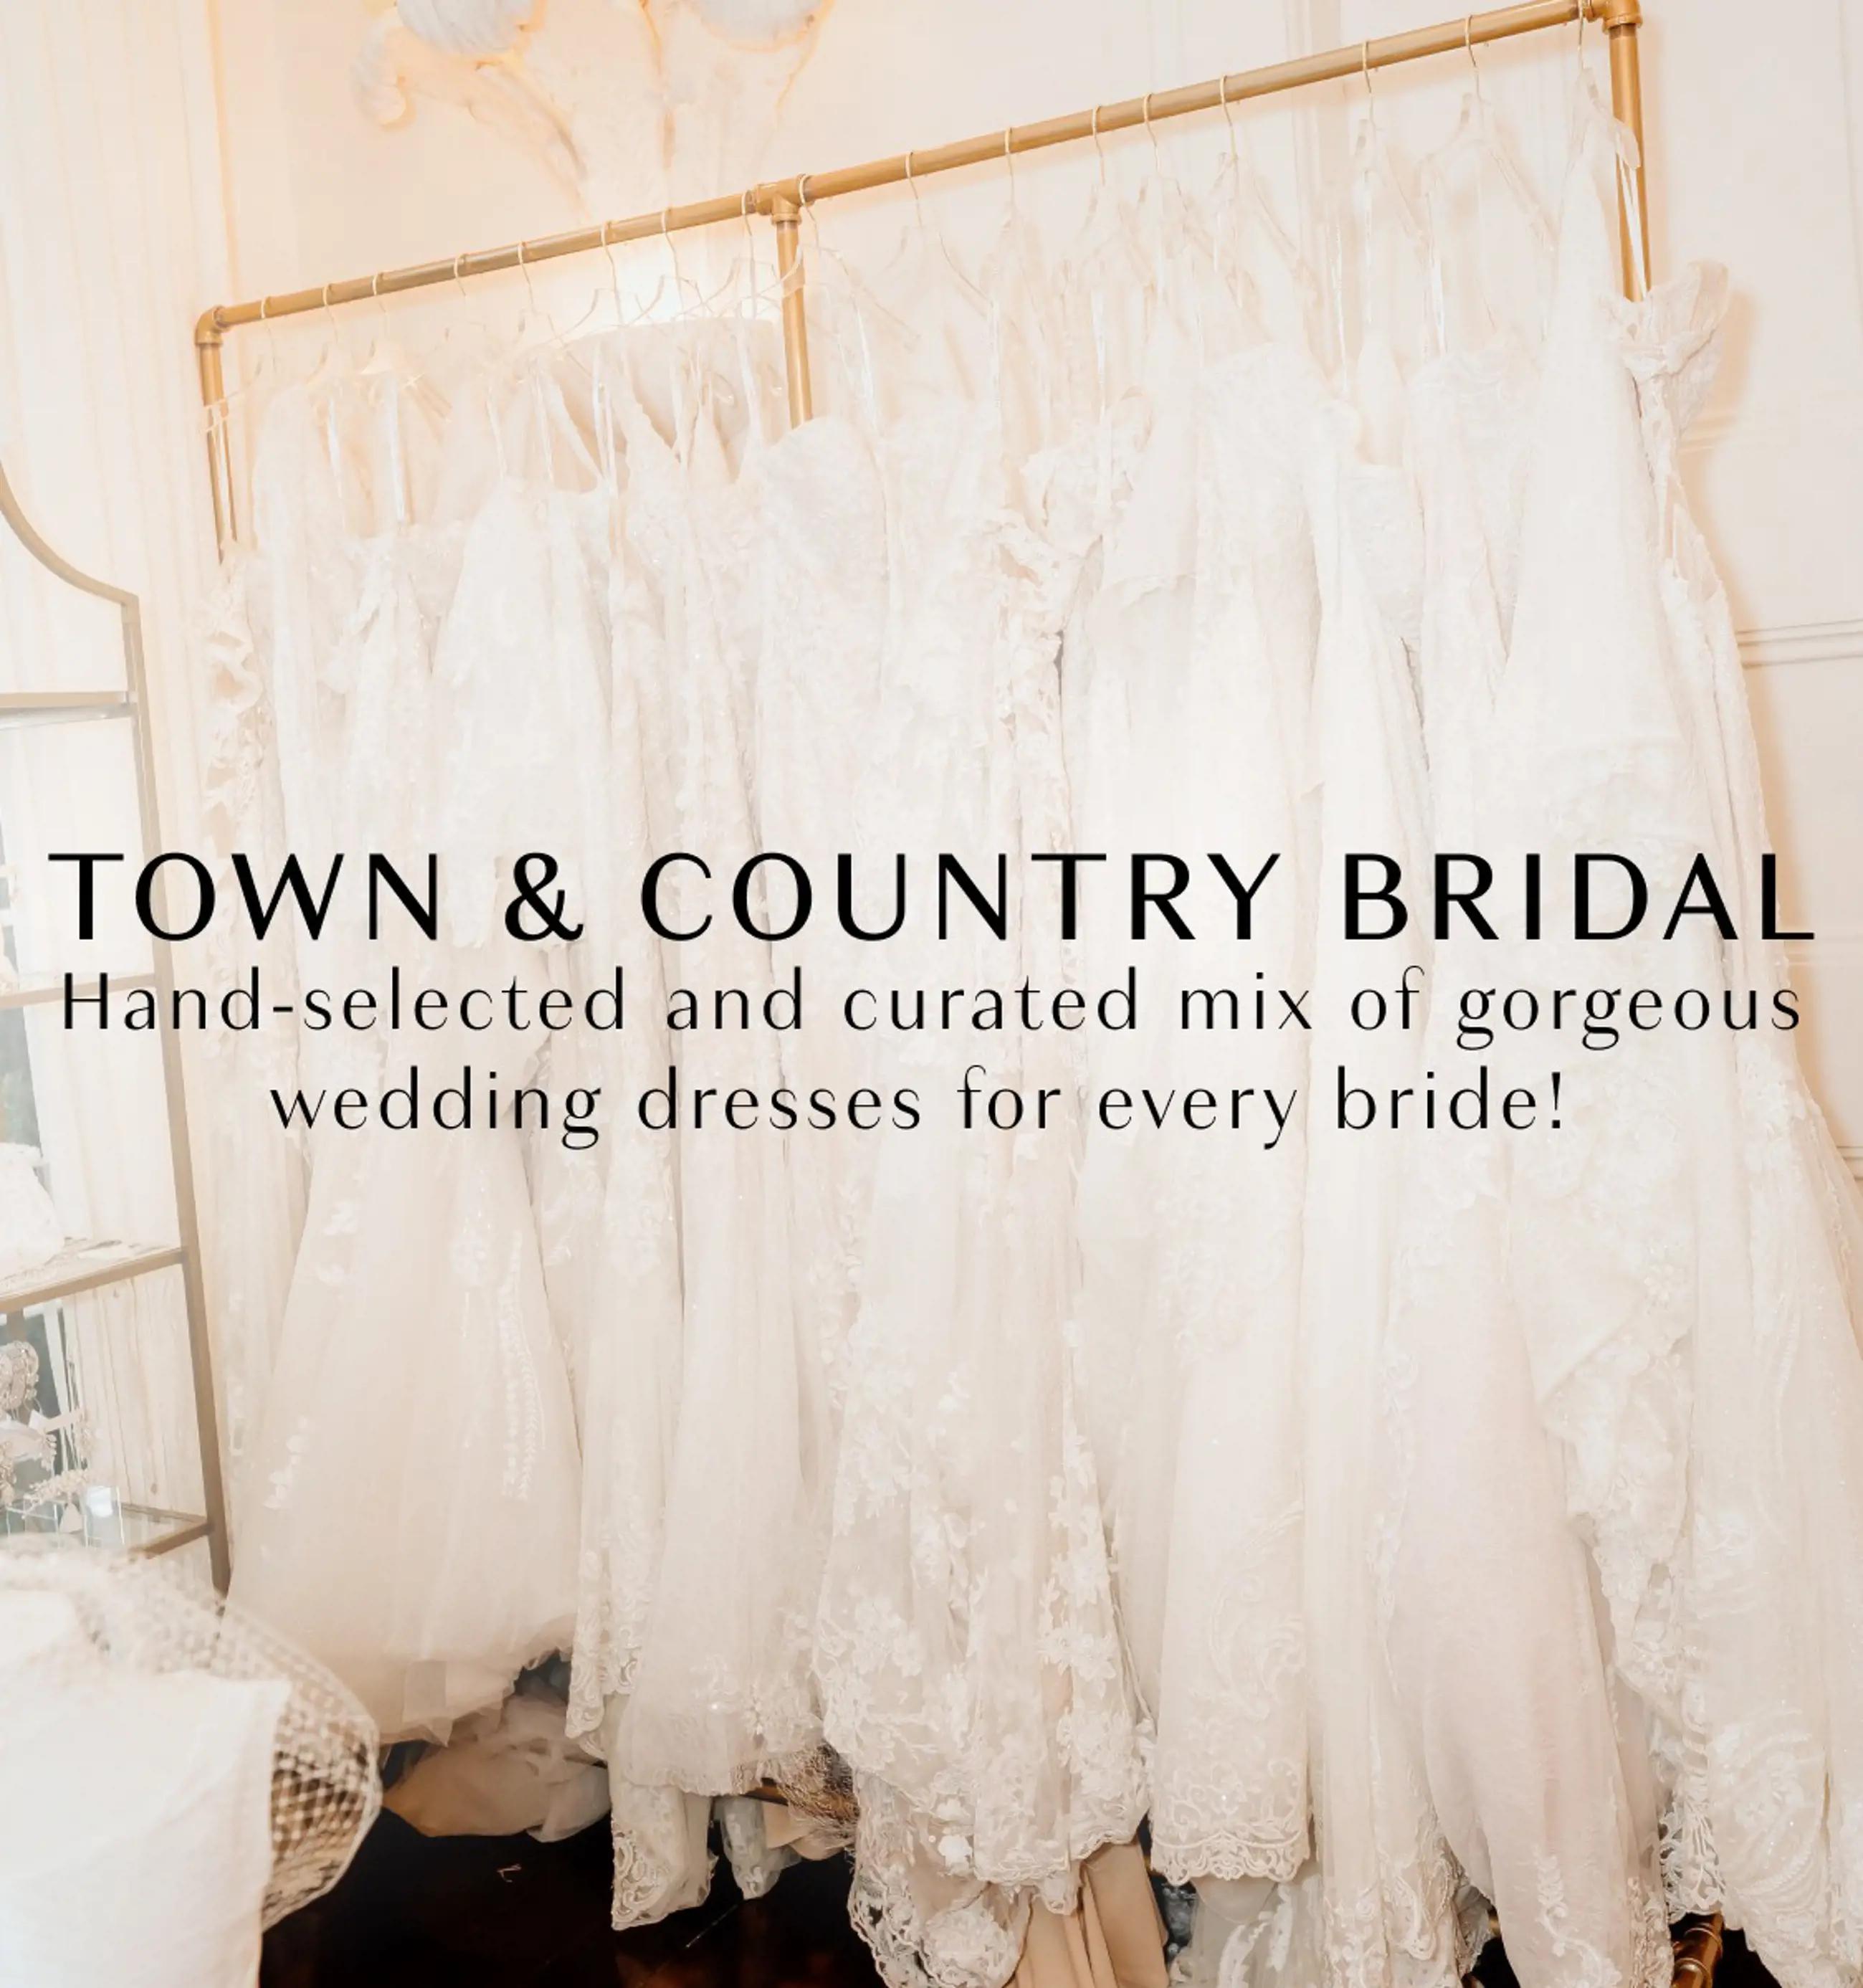 Image of Town & Country Bridal in New Orleans. Mobile image